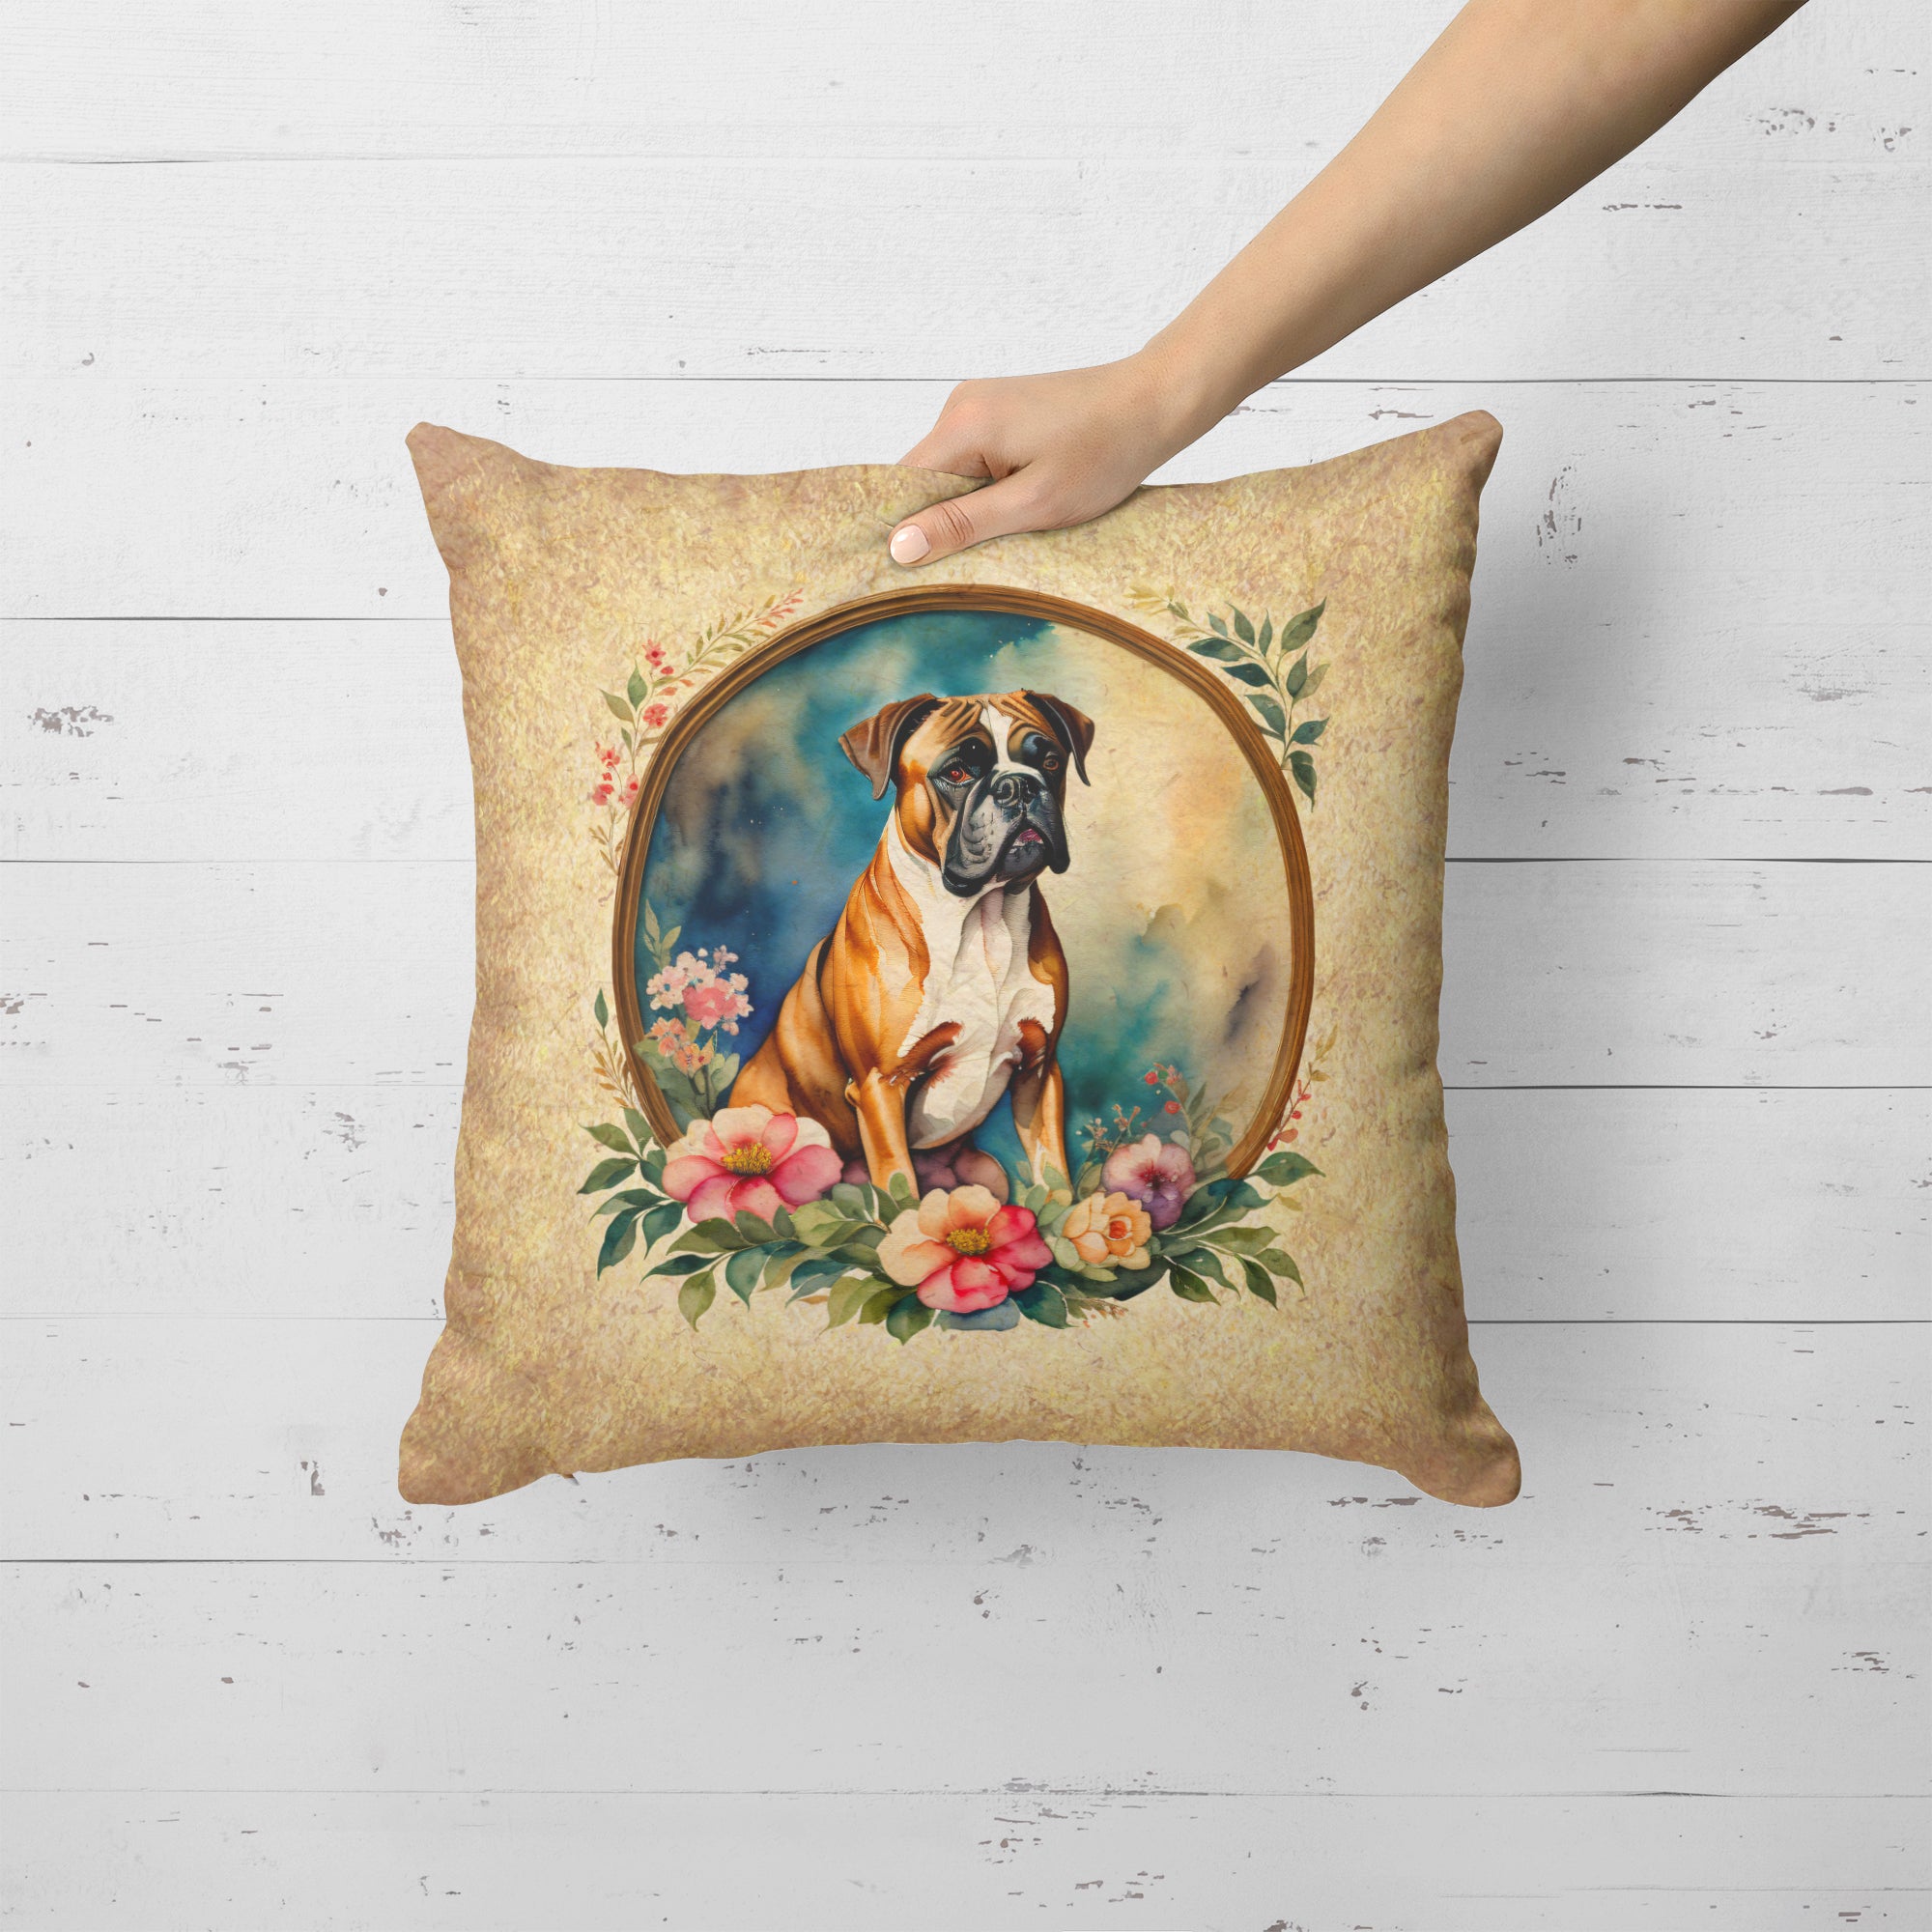 Buy this Boxer and Flowers Fabric Decorative Pillow